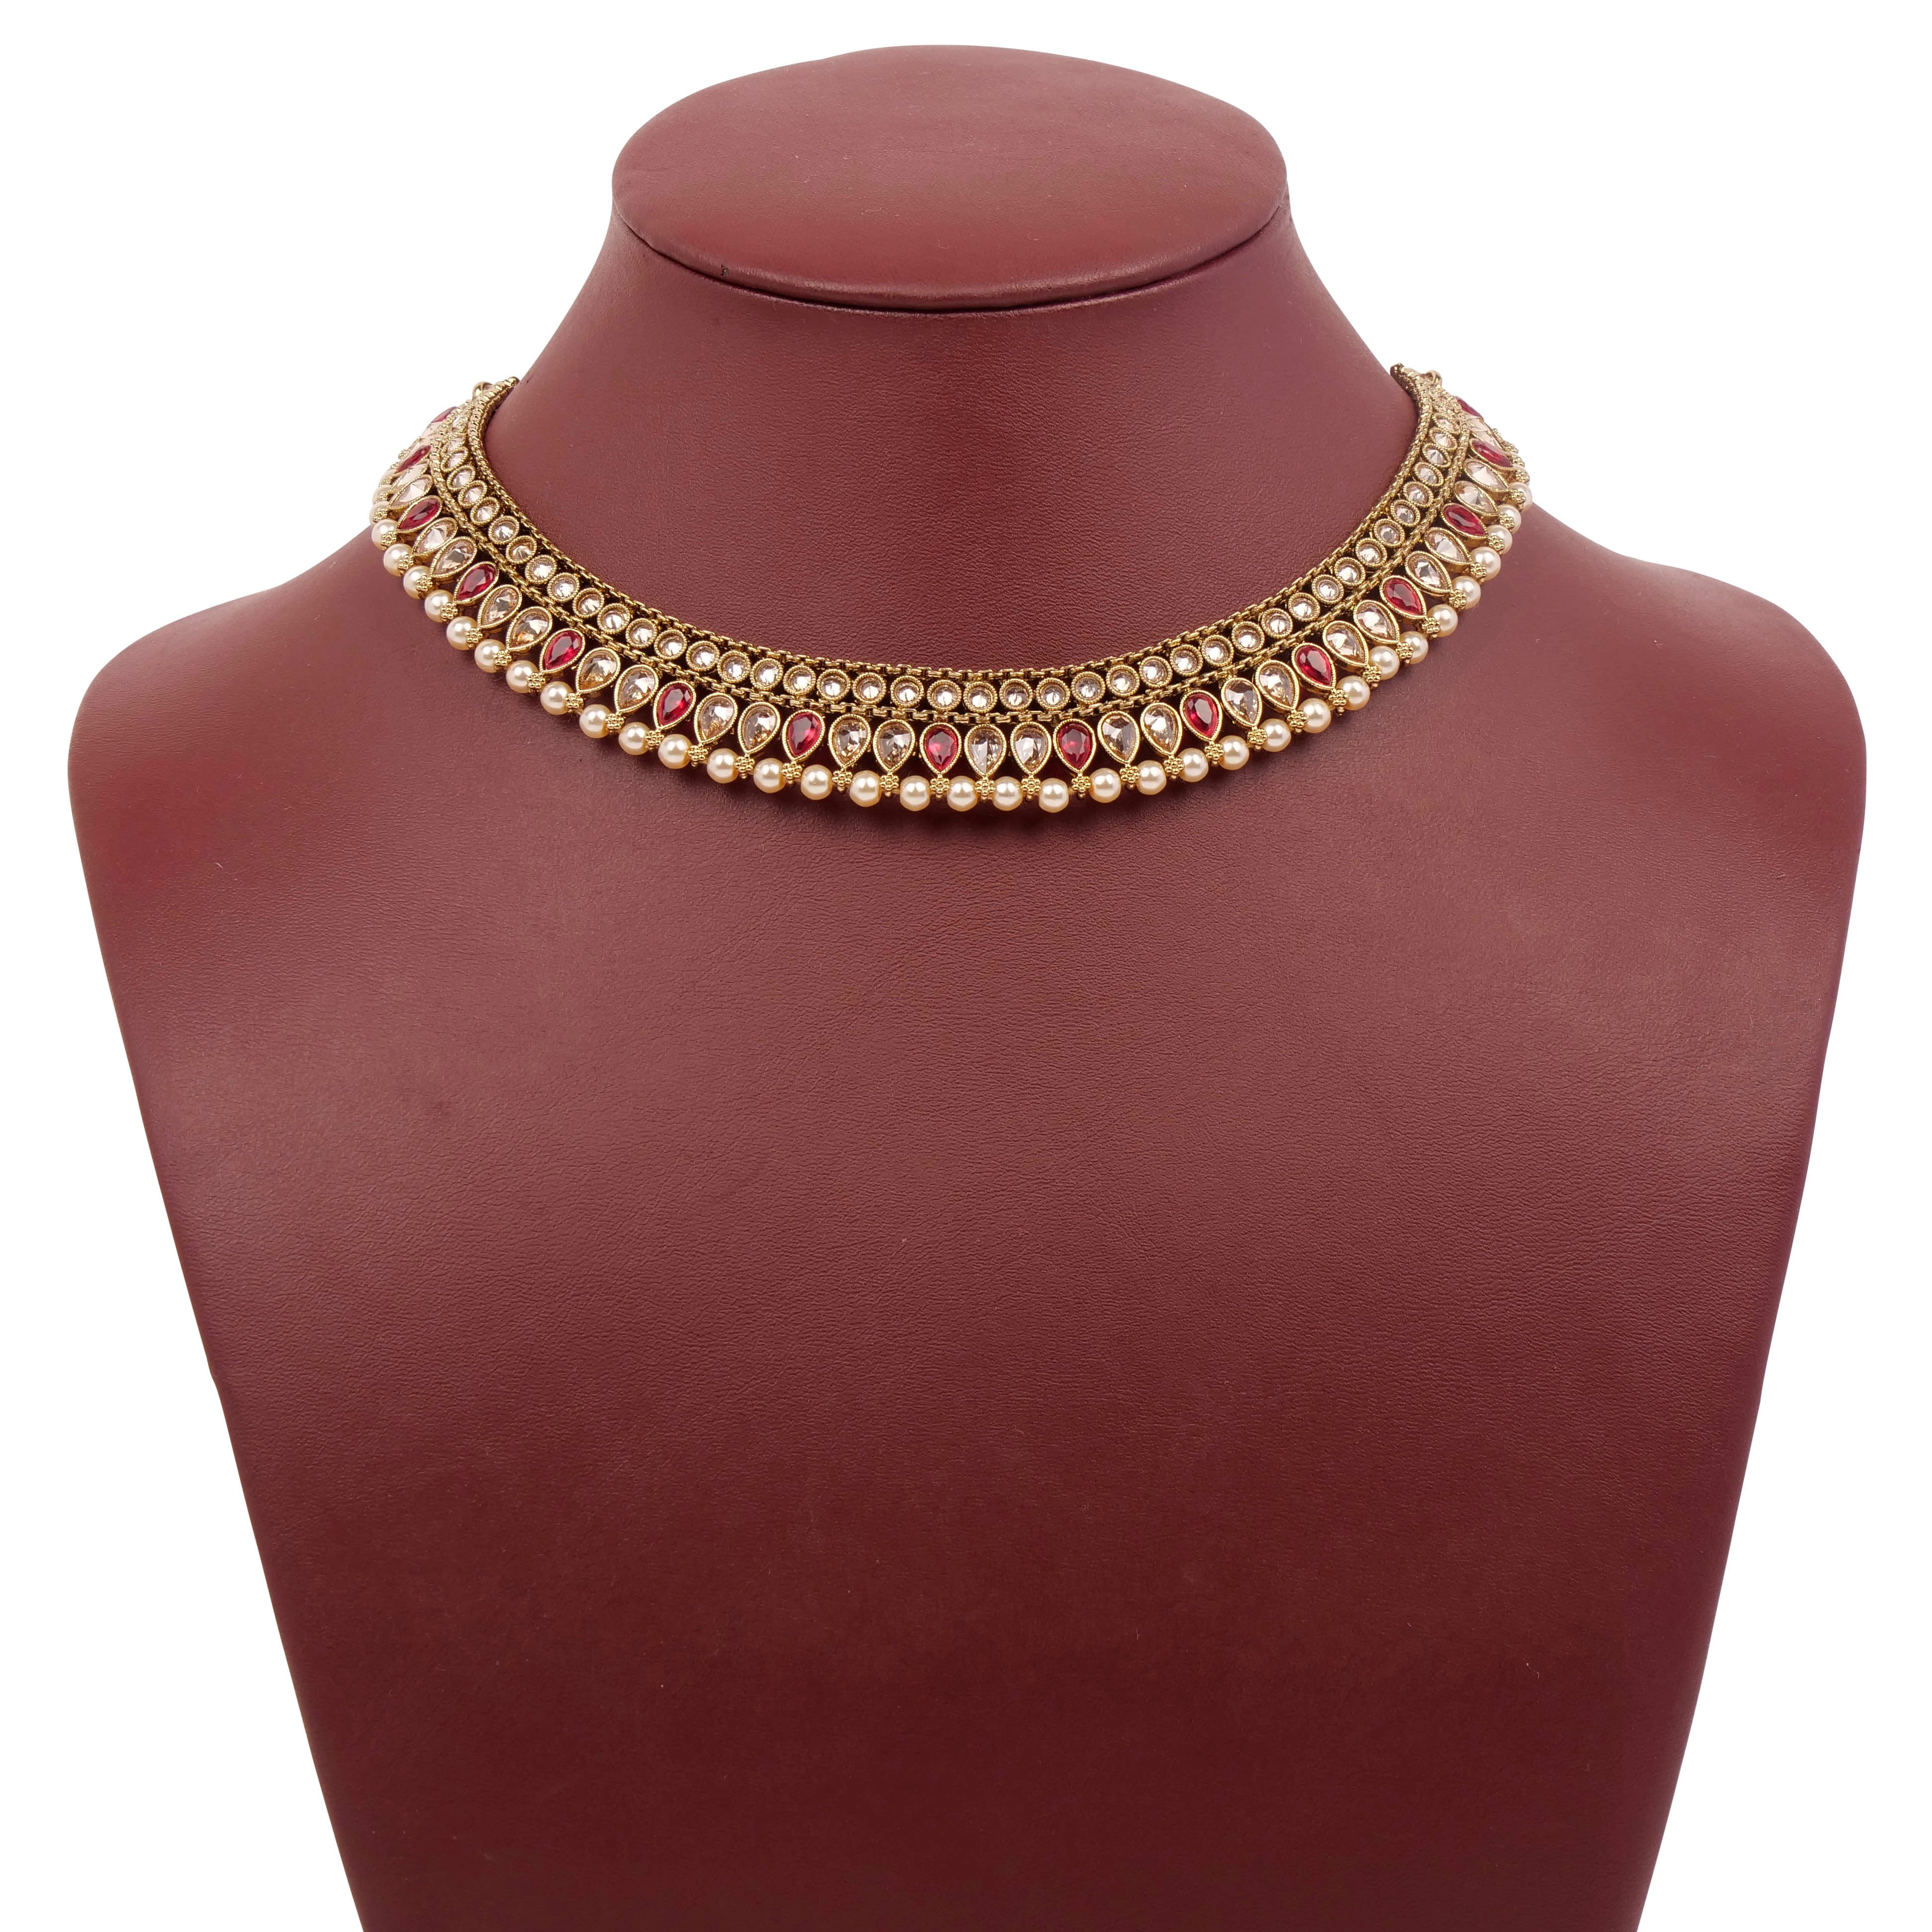 Anala Simple Neckalace Set in Ruby and Pearl